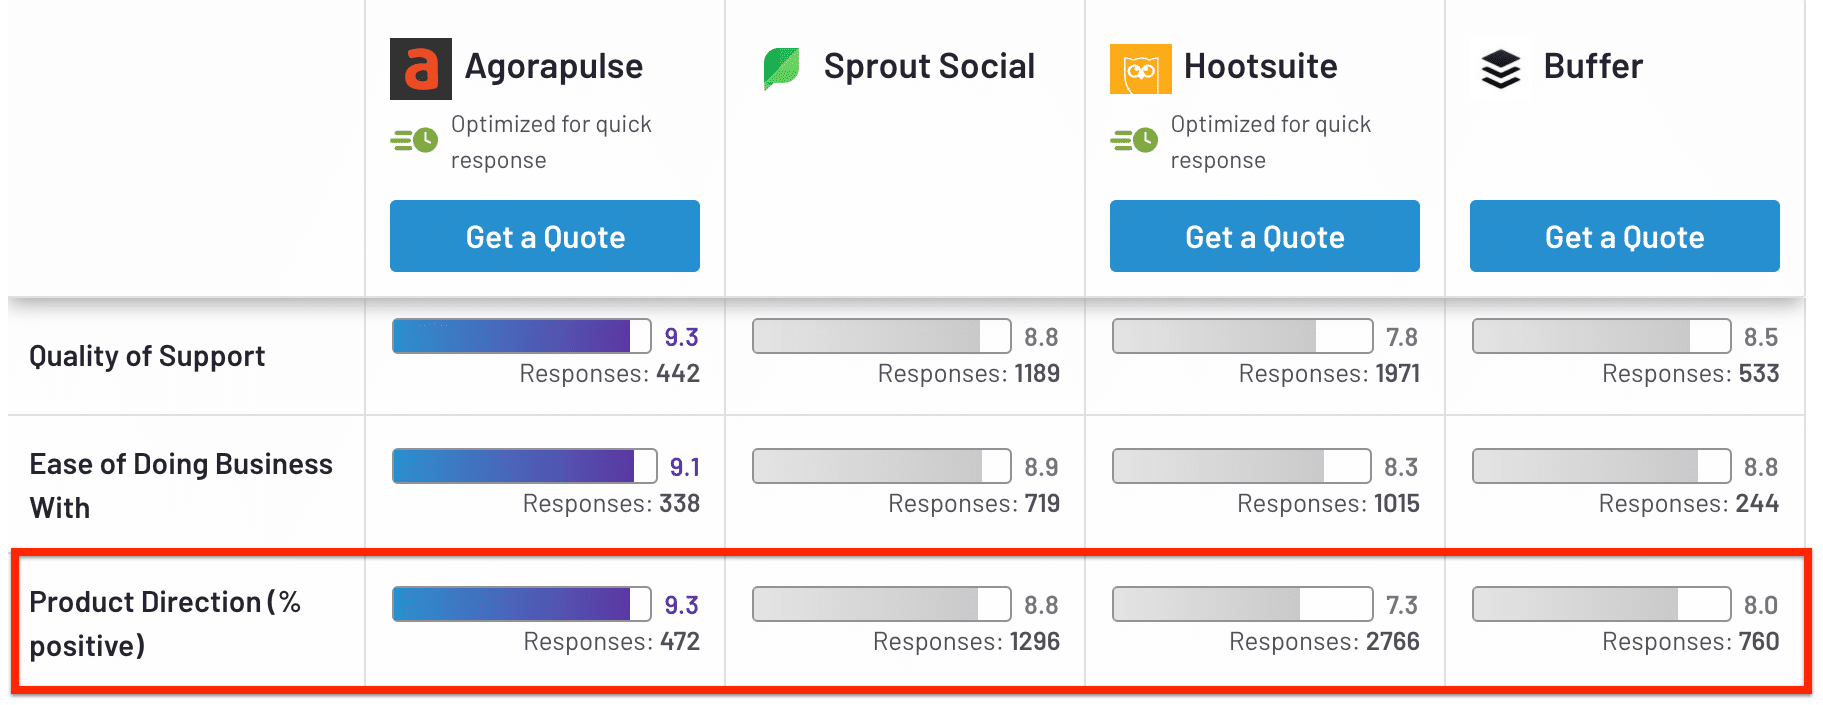 Agorapulse ranks the highest in product direction; Hootsuite ranks the lowest.